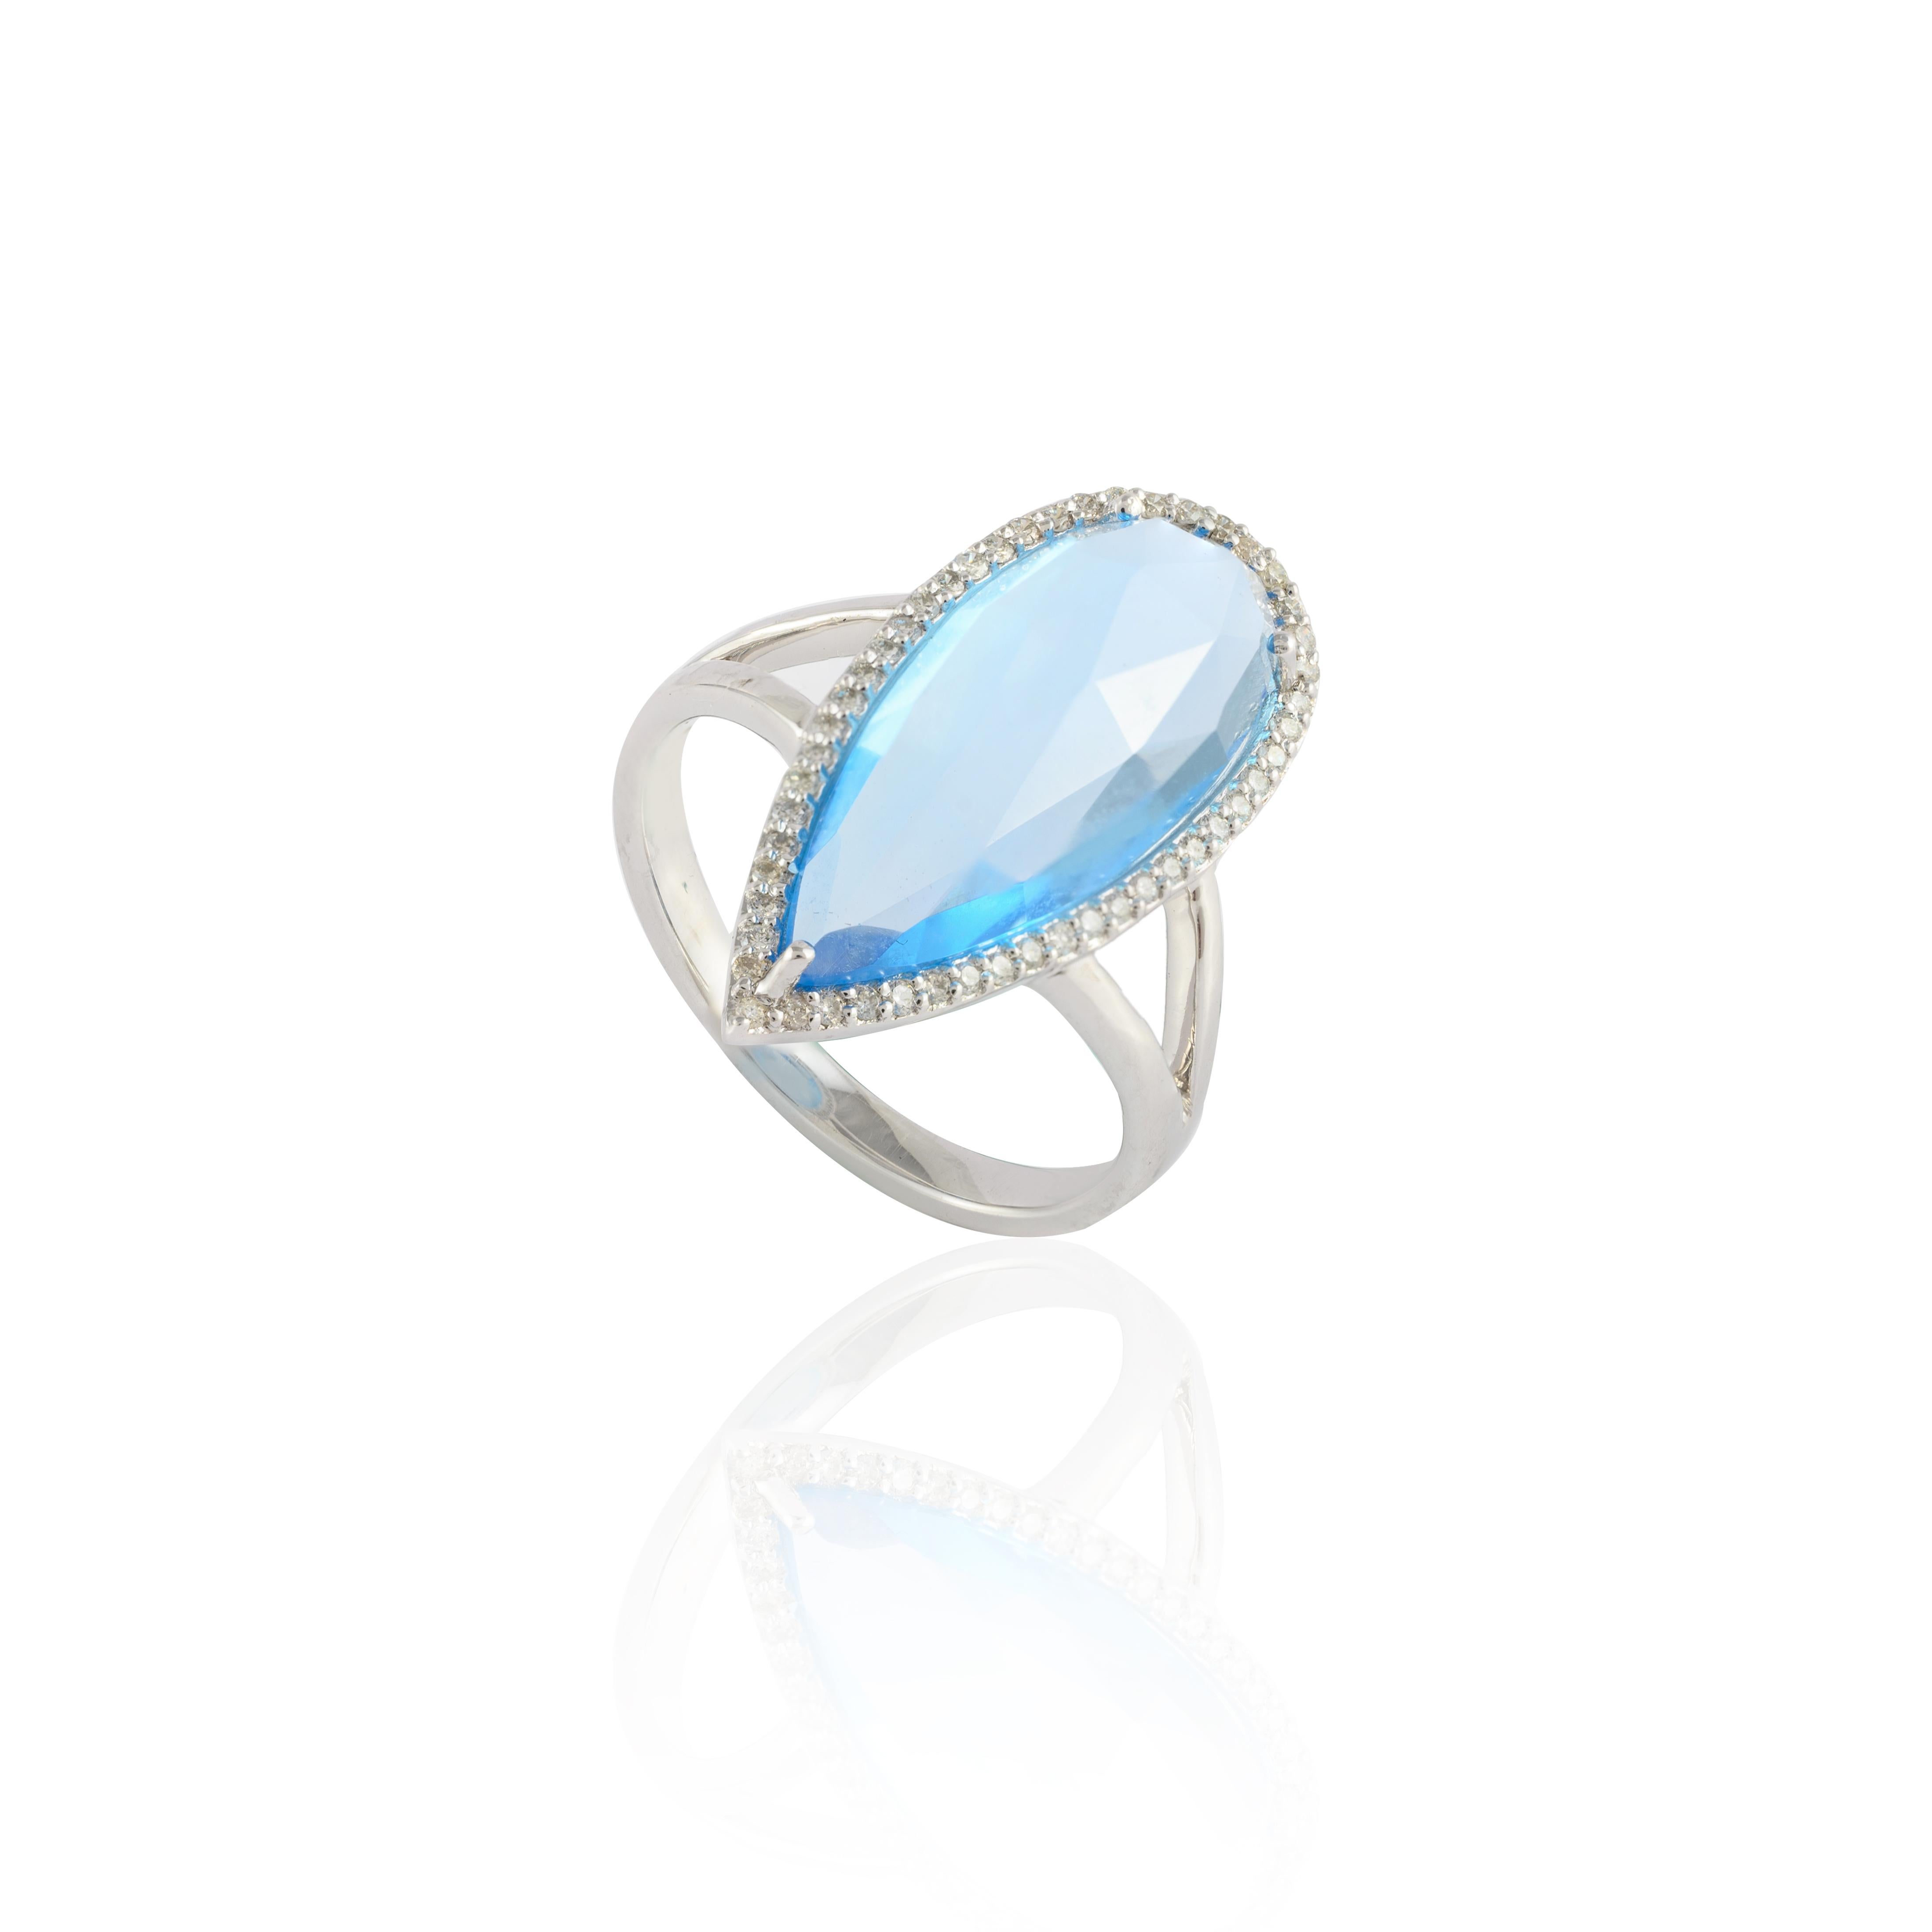 For Sale:  Glitzy 6.82 Carat Pear Blue Topaz Diamond Cocktail Ring in 14k Solid White Gold 8